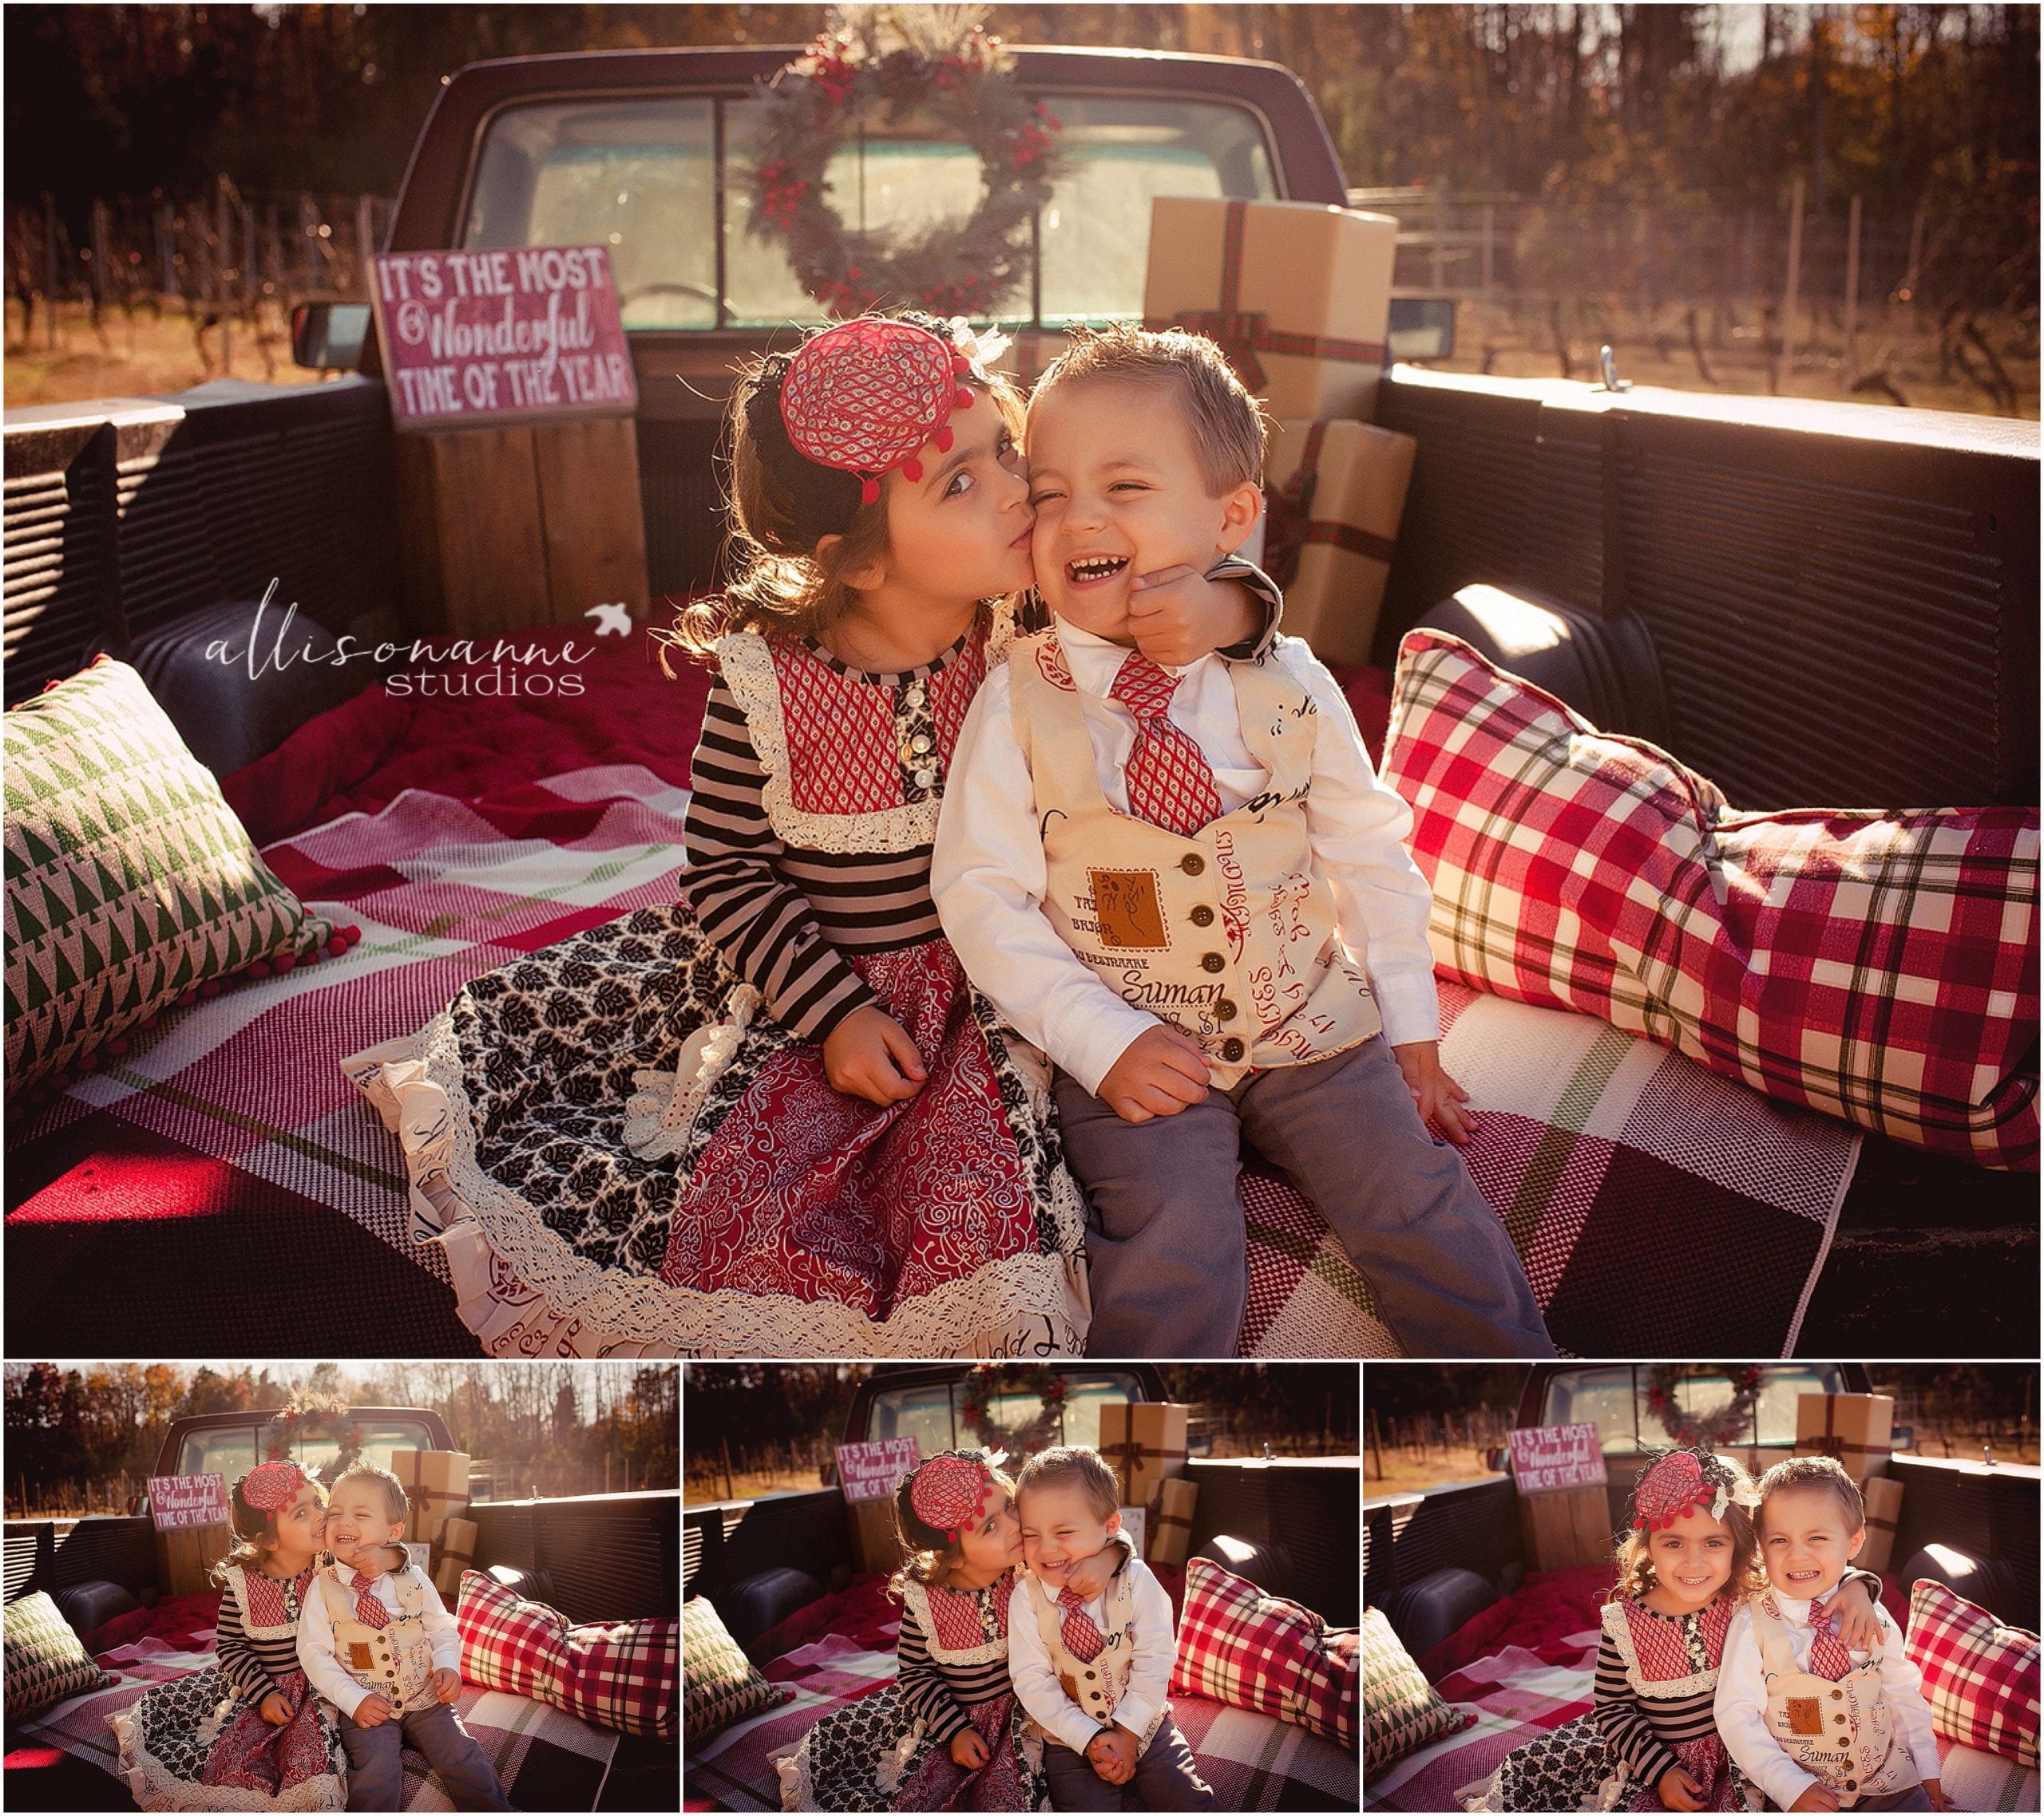 Allessio & Stella, brother-sister duo, christmas Mini sessions, Hammonton, best south jersey photographer, AllisonAnne Studios, Allison Gallagher